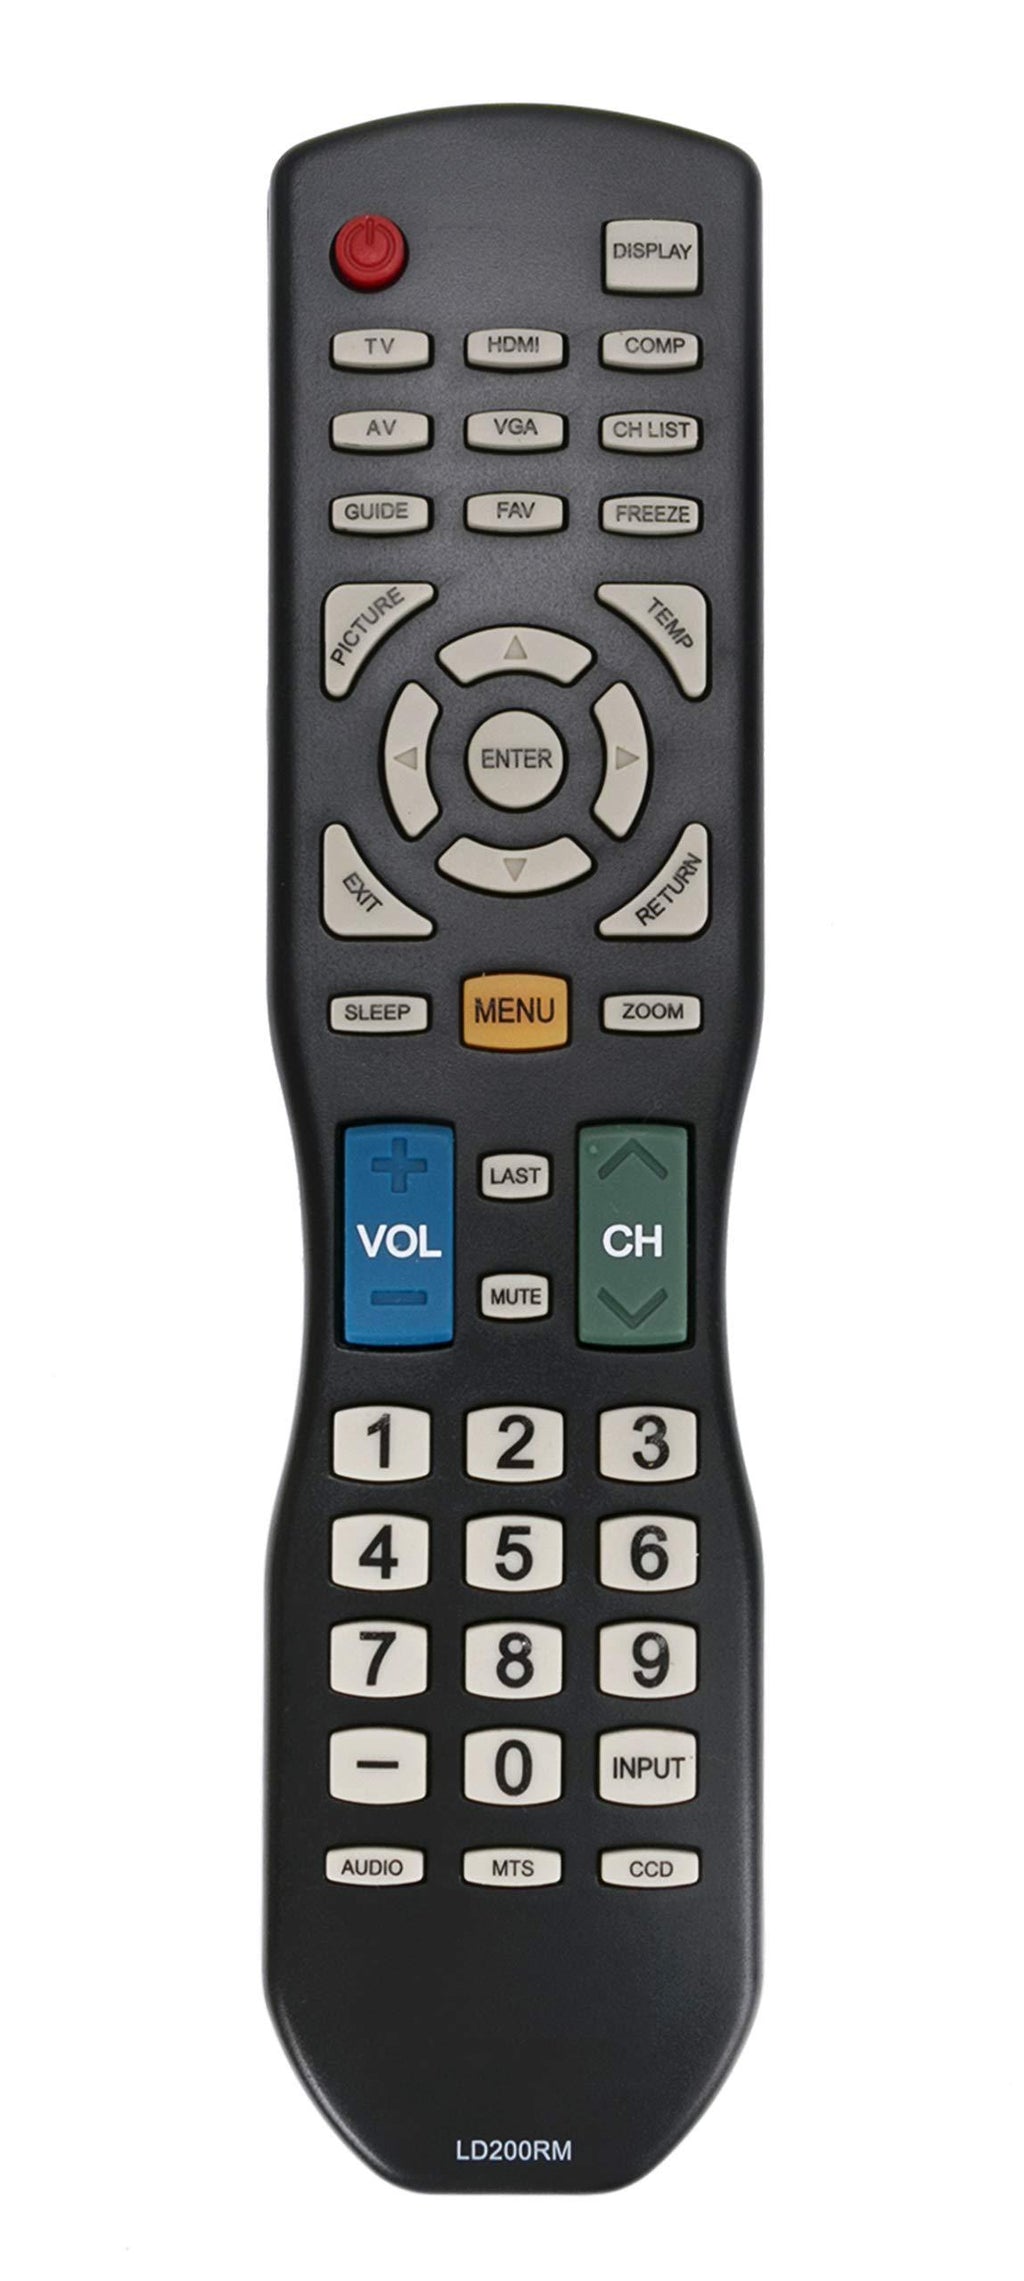 AULCMEET TV Remote Control LD200RM LD220RM Compatible with APEX Digital Smart TV LD4688T LE40H88 LD3249 LD3288T LD3288M LD4077 LE4077M LD4088 LD4688 LE3212 LE3212D LE4012 LE4612 LE3242 LD4088RM